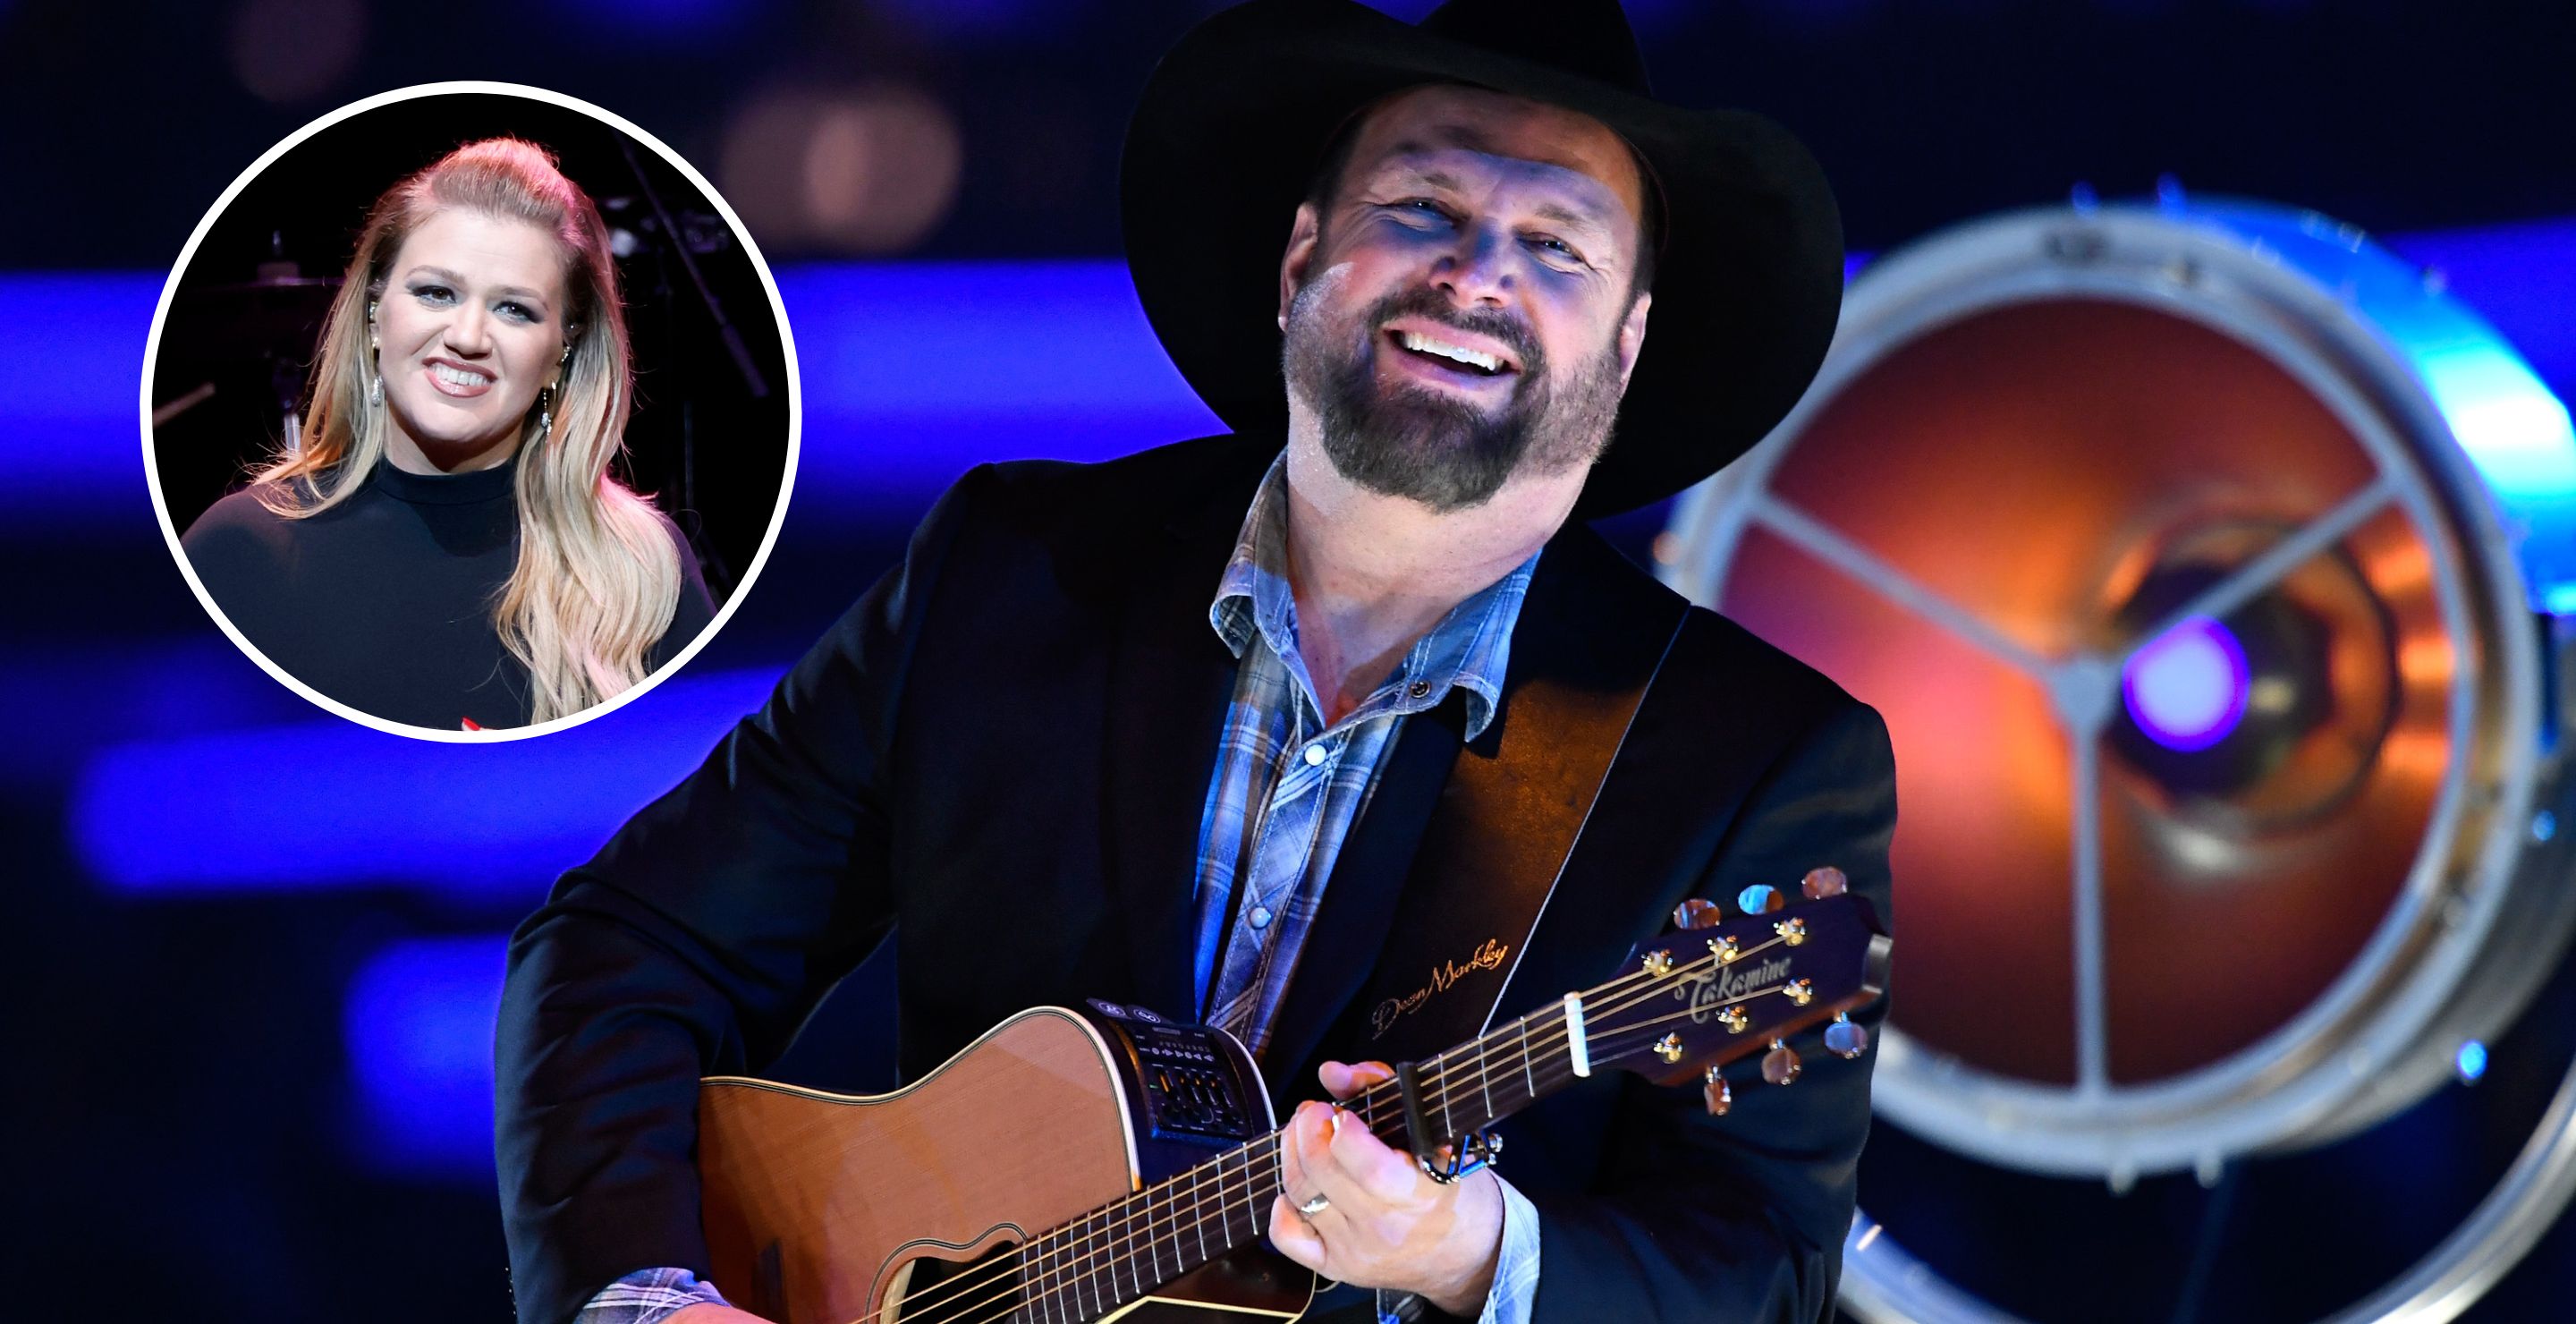 Garth Brooks 'Time Traveler' album: What songs are on it? How to